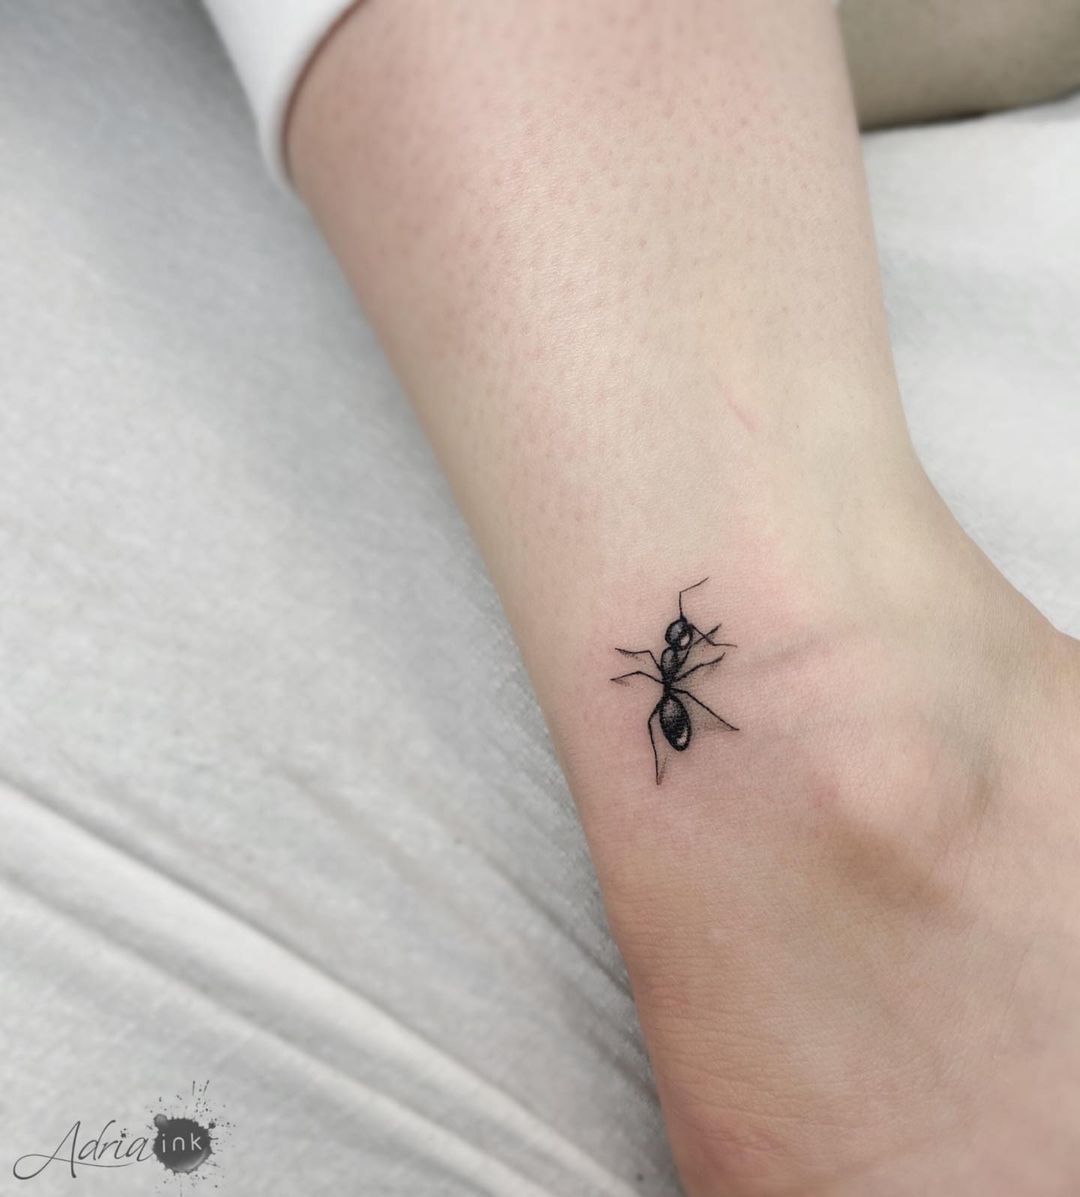 Ant tattoo by addria ink